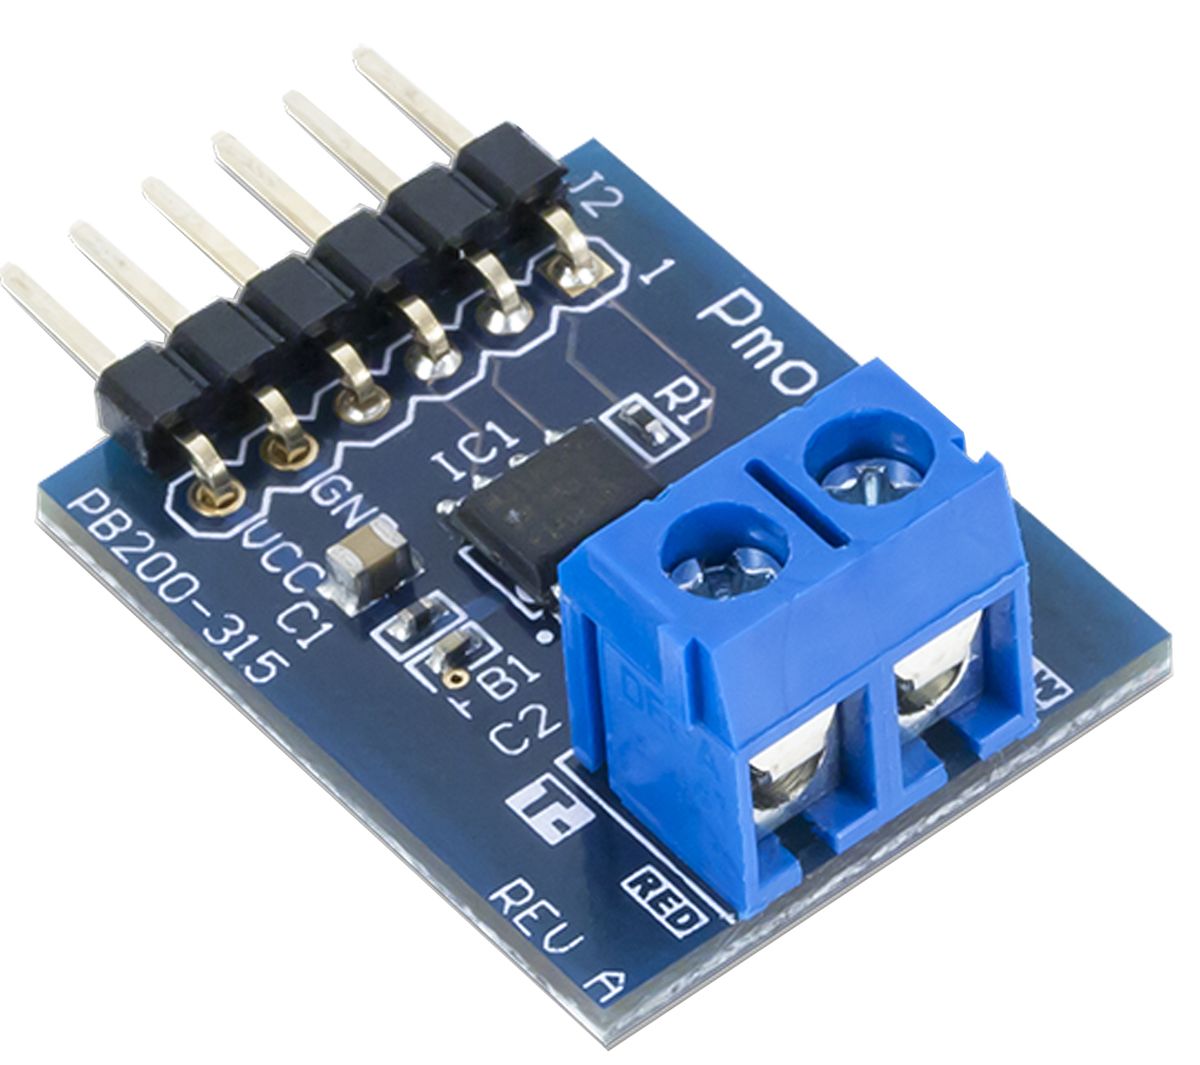 Digilent Pmod TC1: K-Type Thermocouple Module with Wire Expansion Module